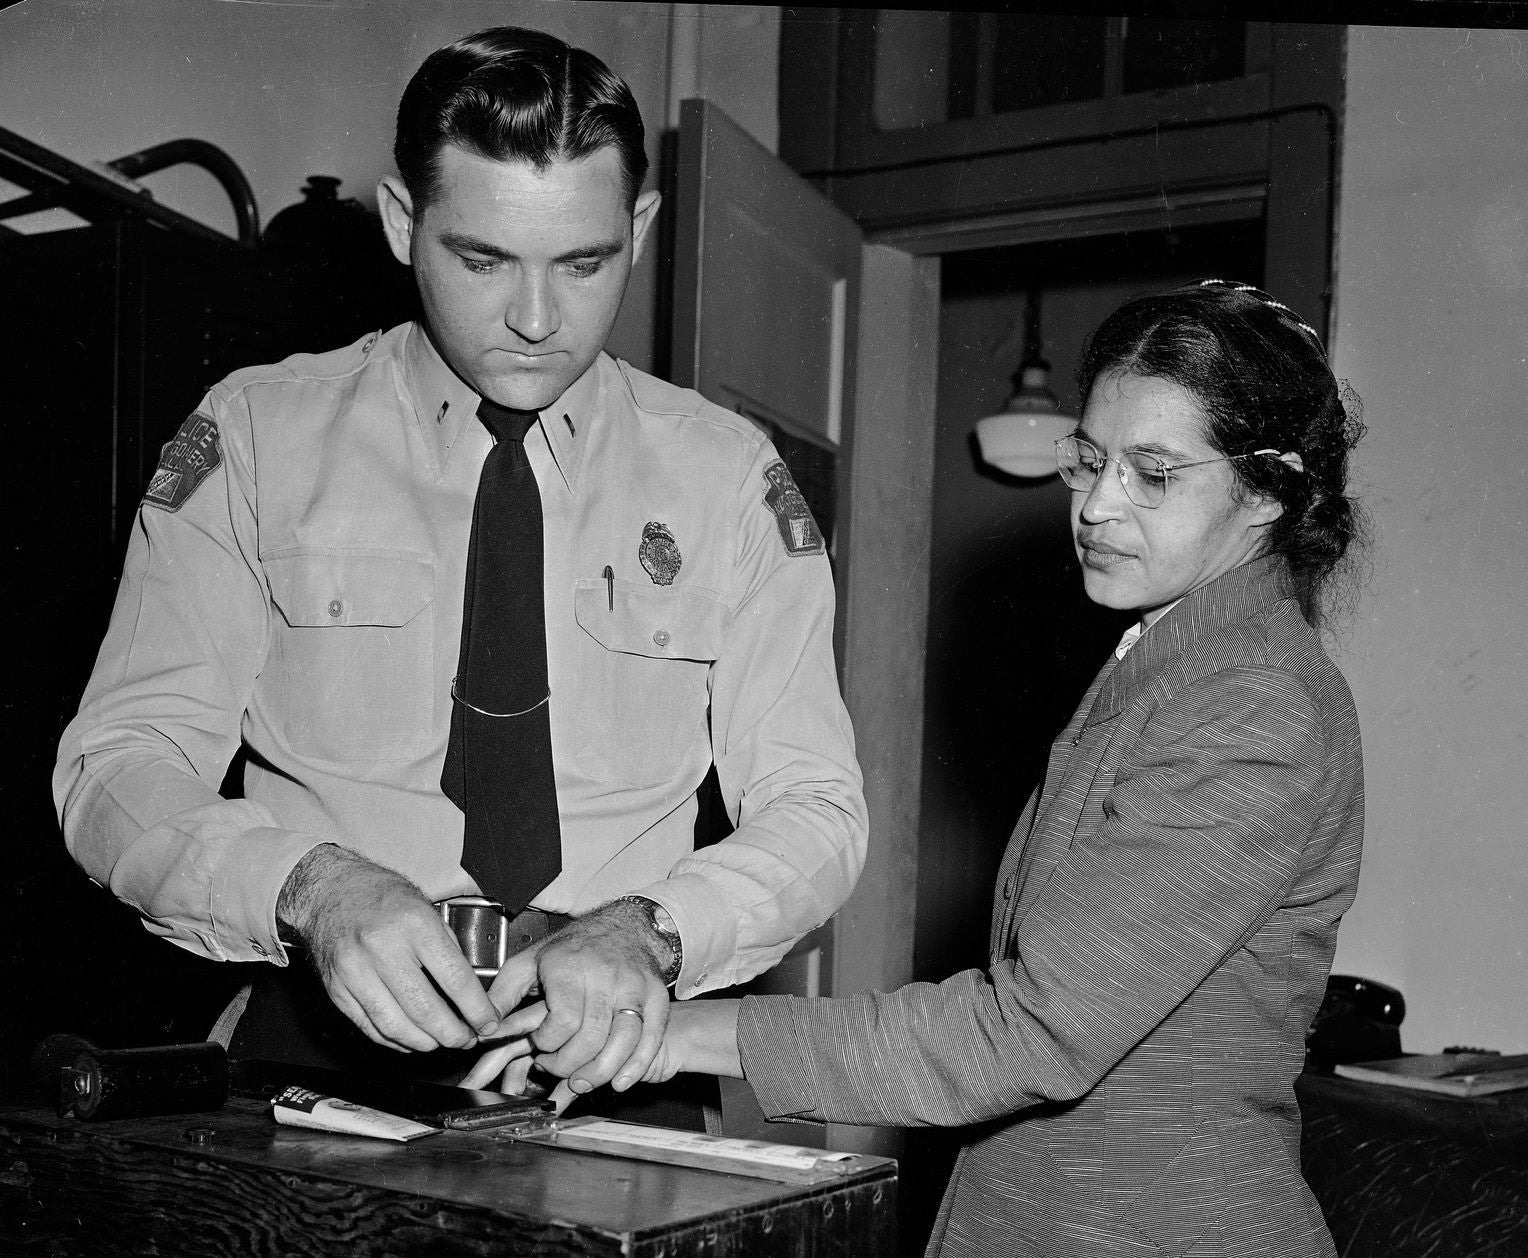 rosa parks is fingerprinted in december 1955 after her arrest. image courtesy of the library of congress.